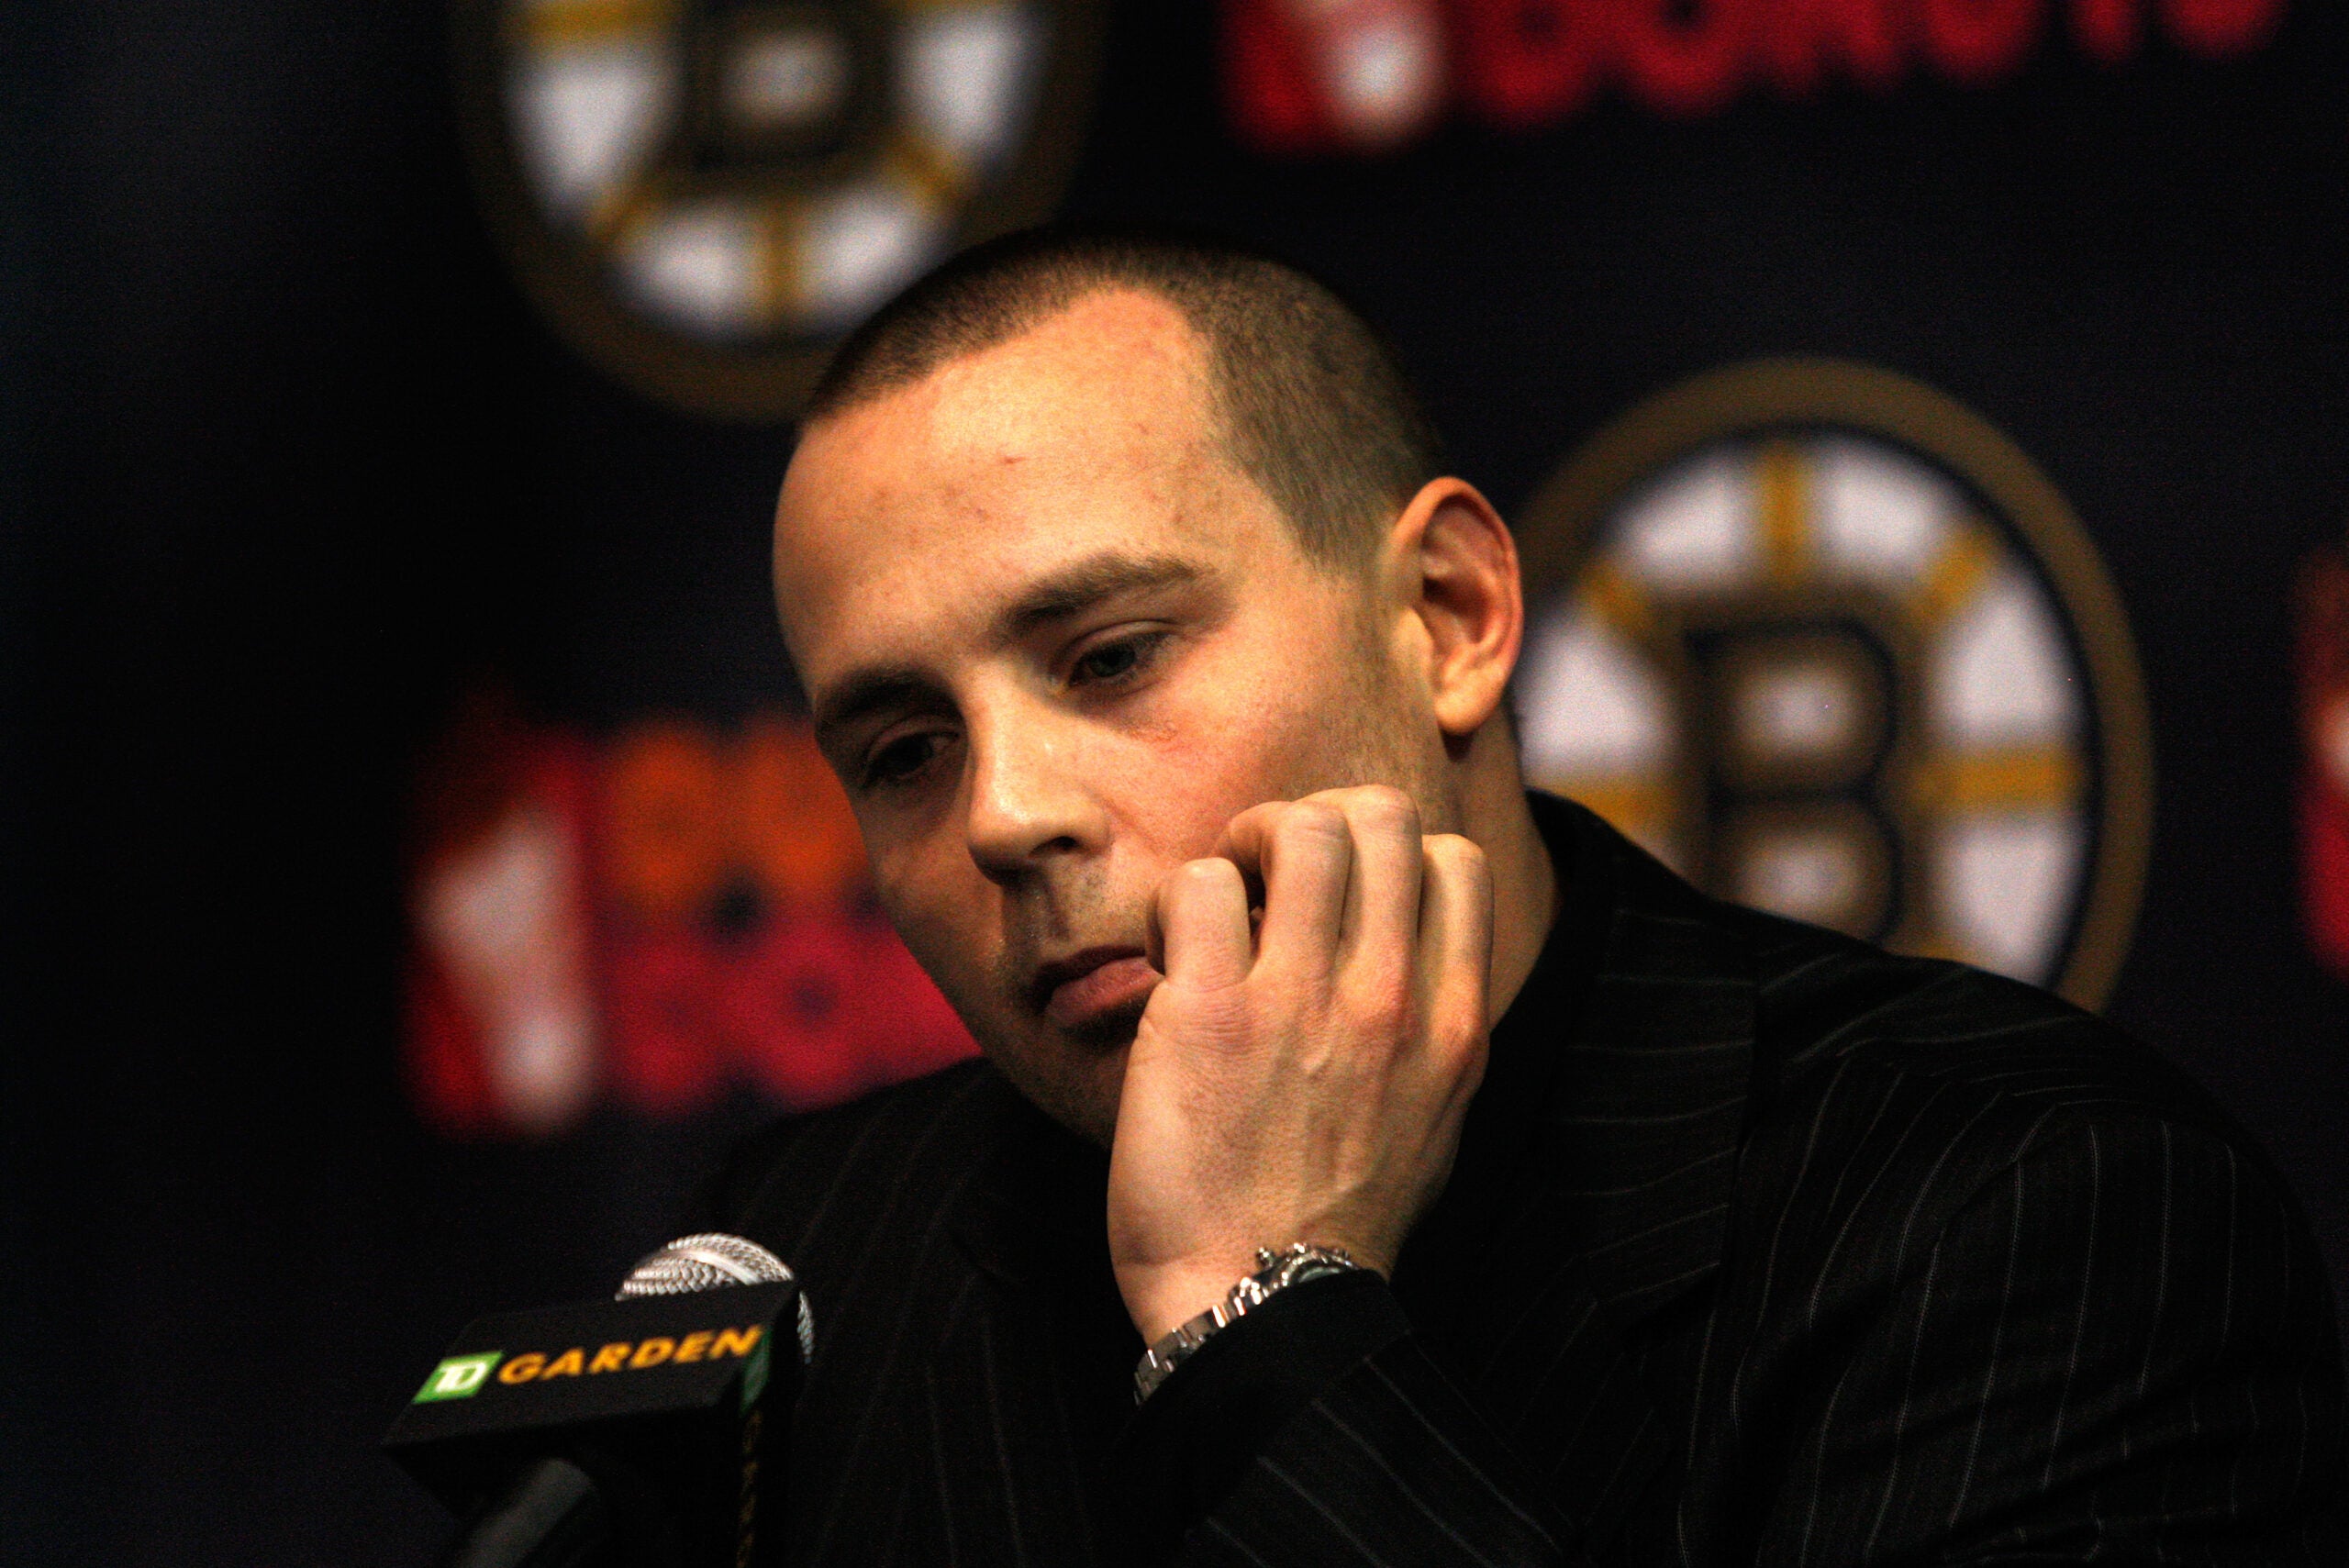 Is The End Near For Marc Savard?